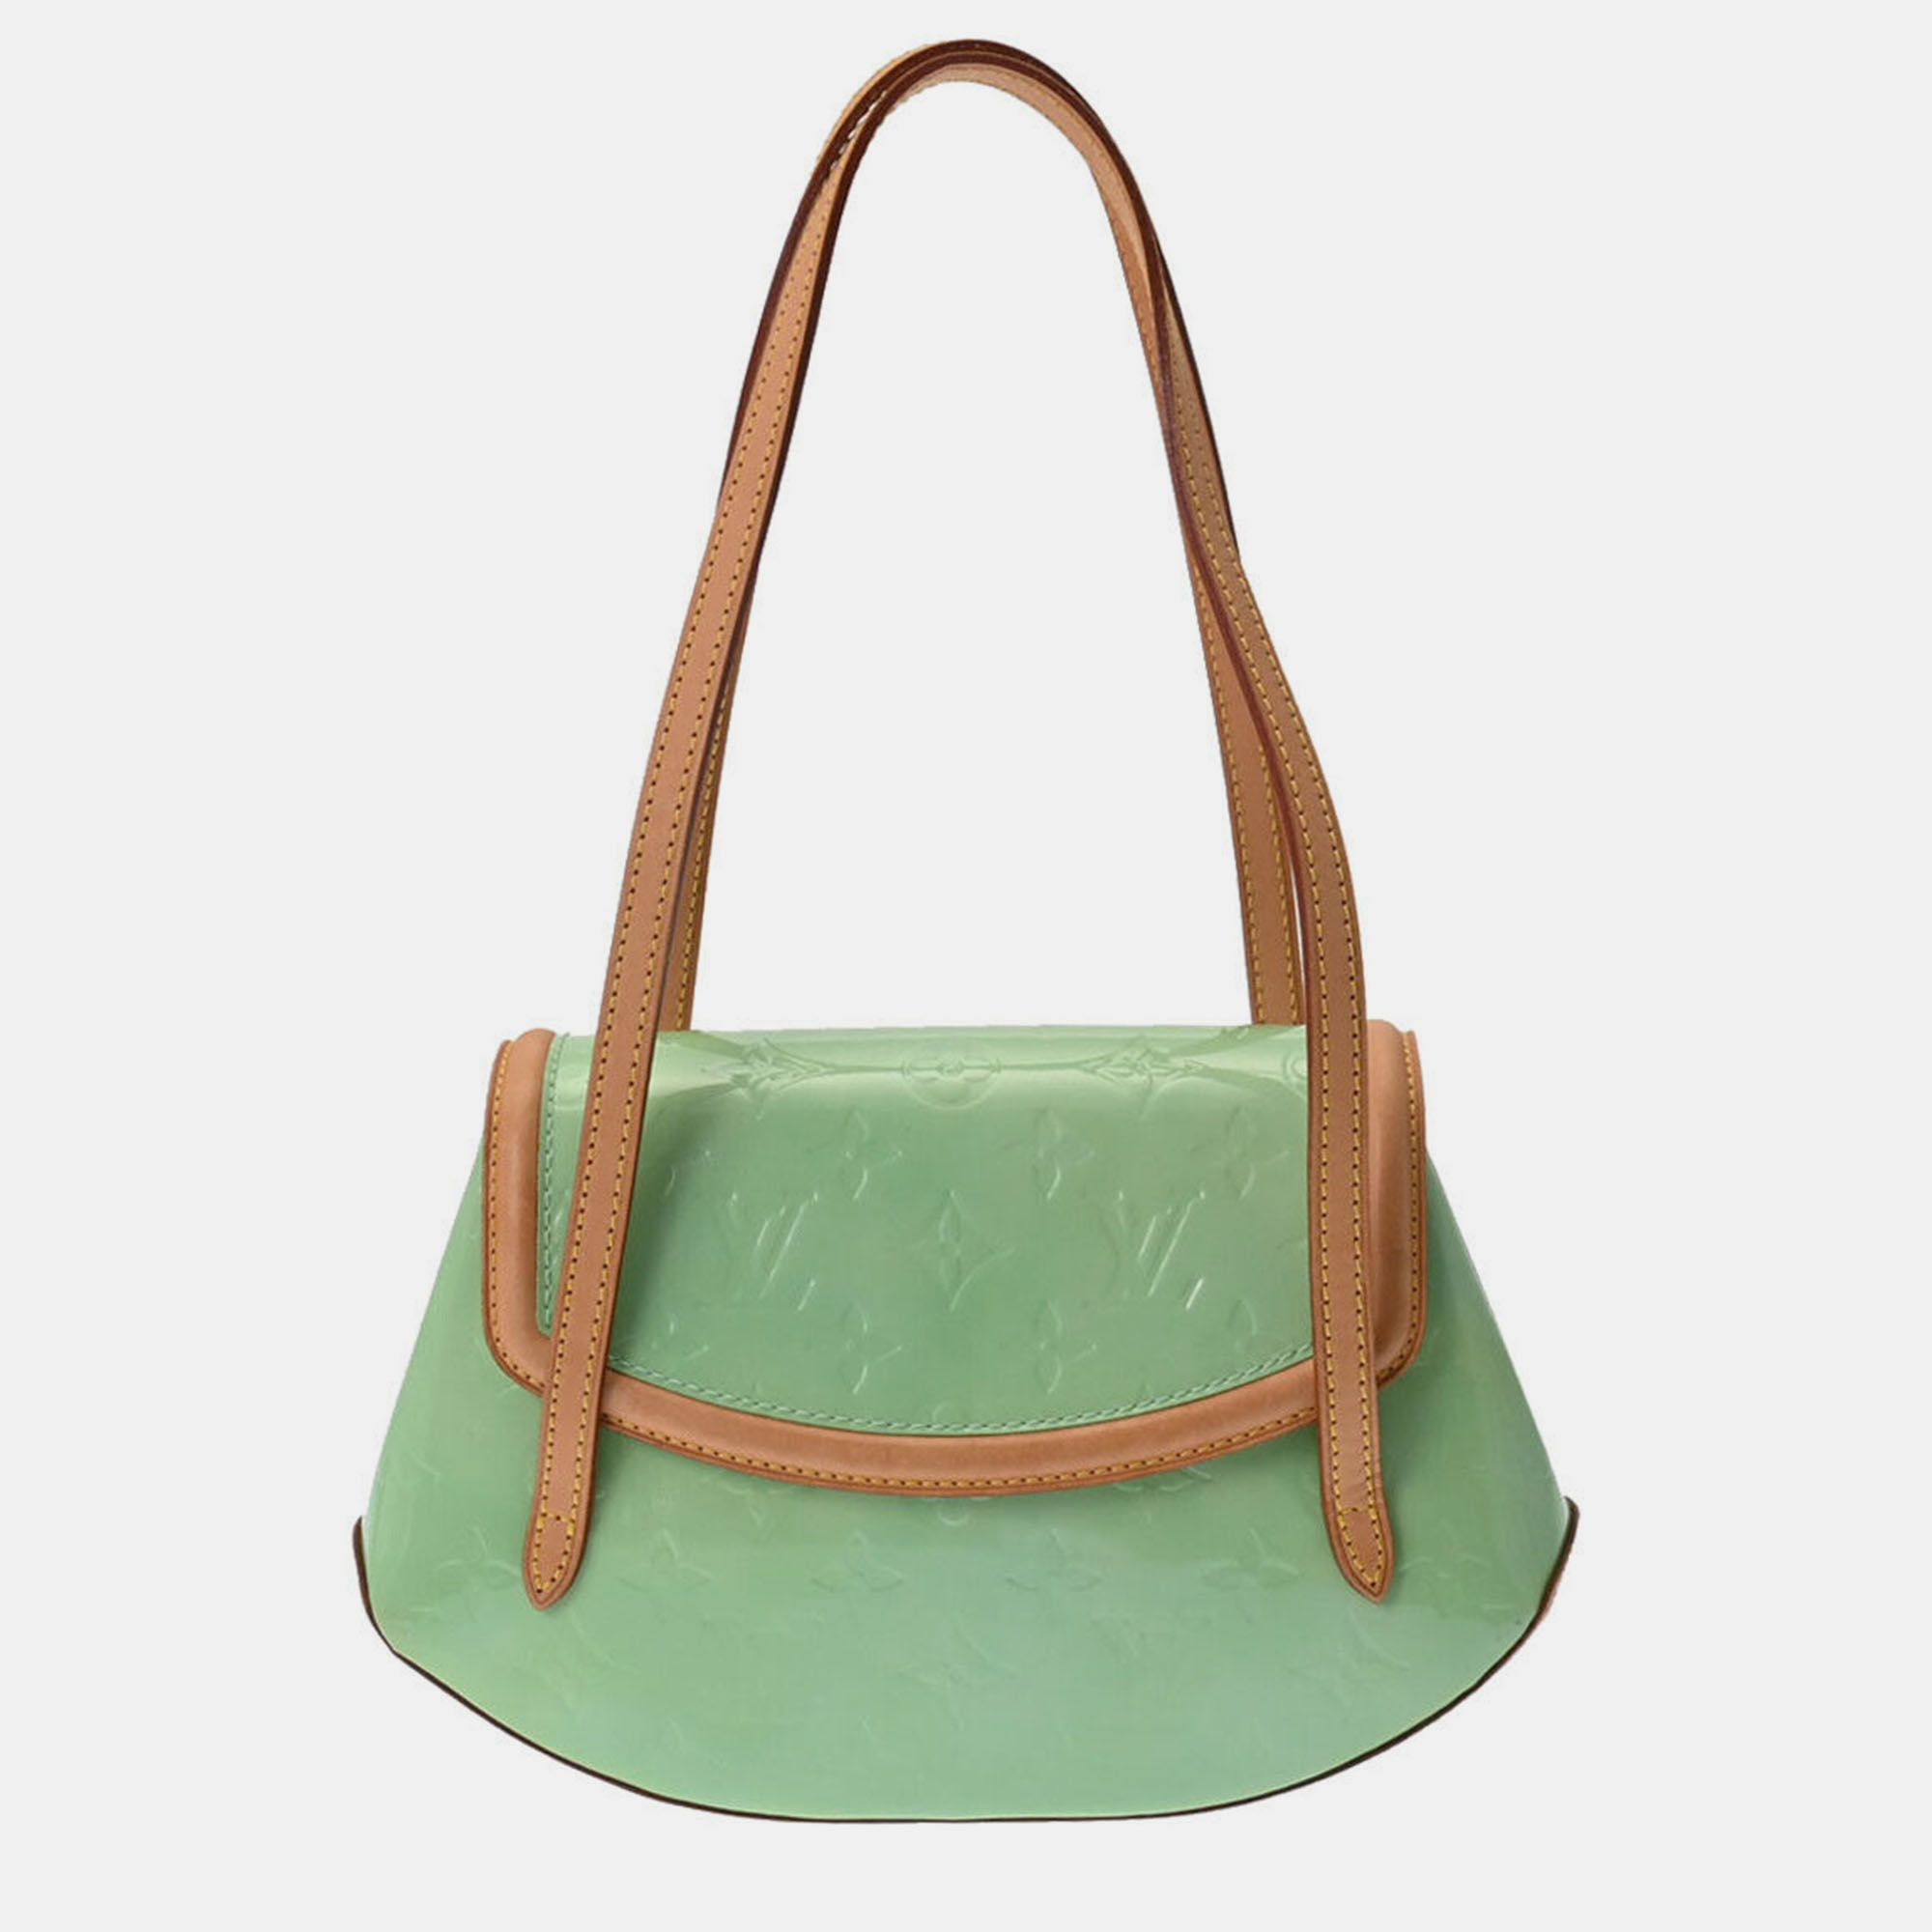 Pre-owned Louis Vuitton Green Vernis Small Biscayne Bay Shoulder Bag